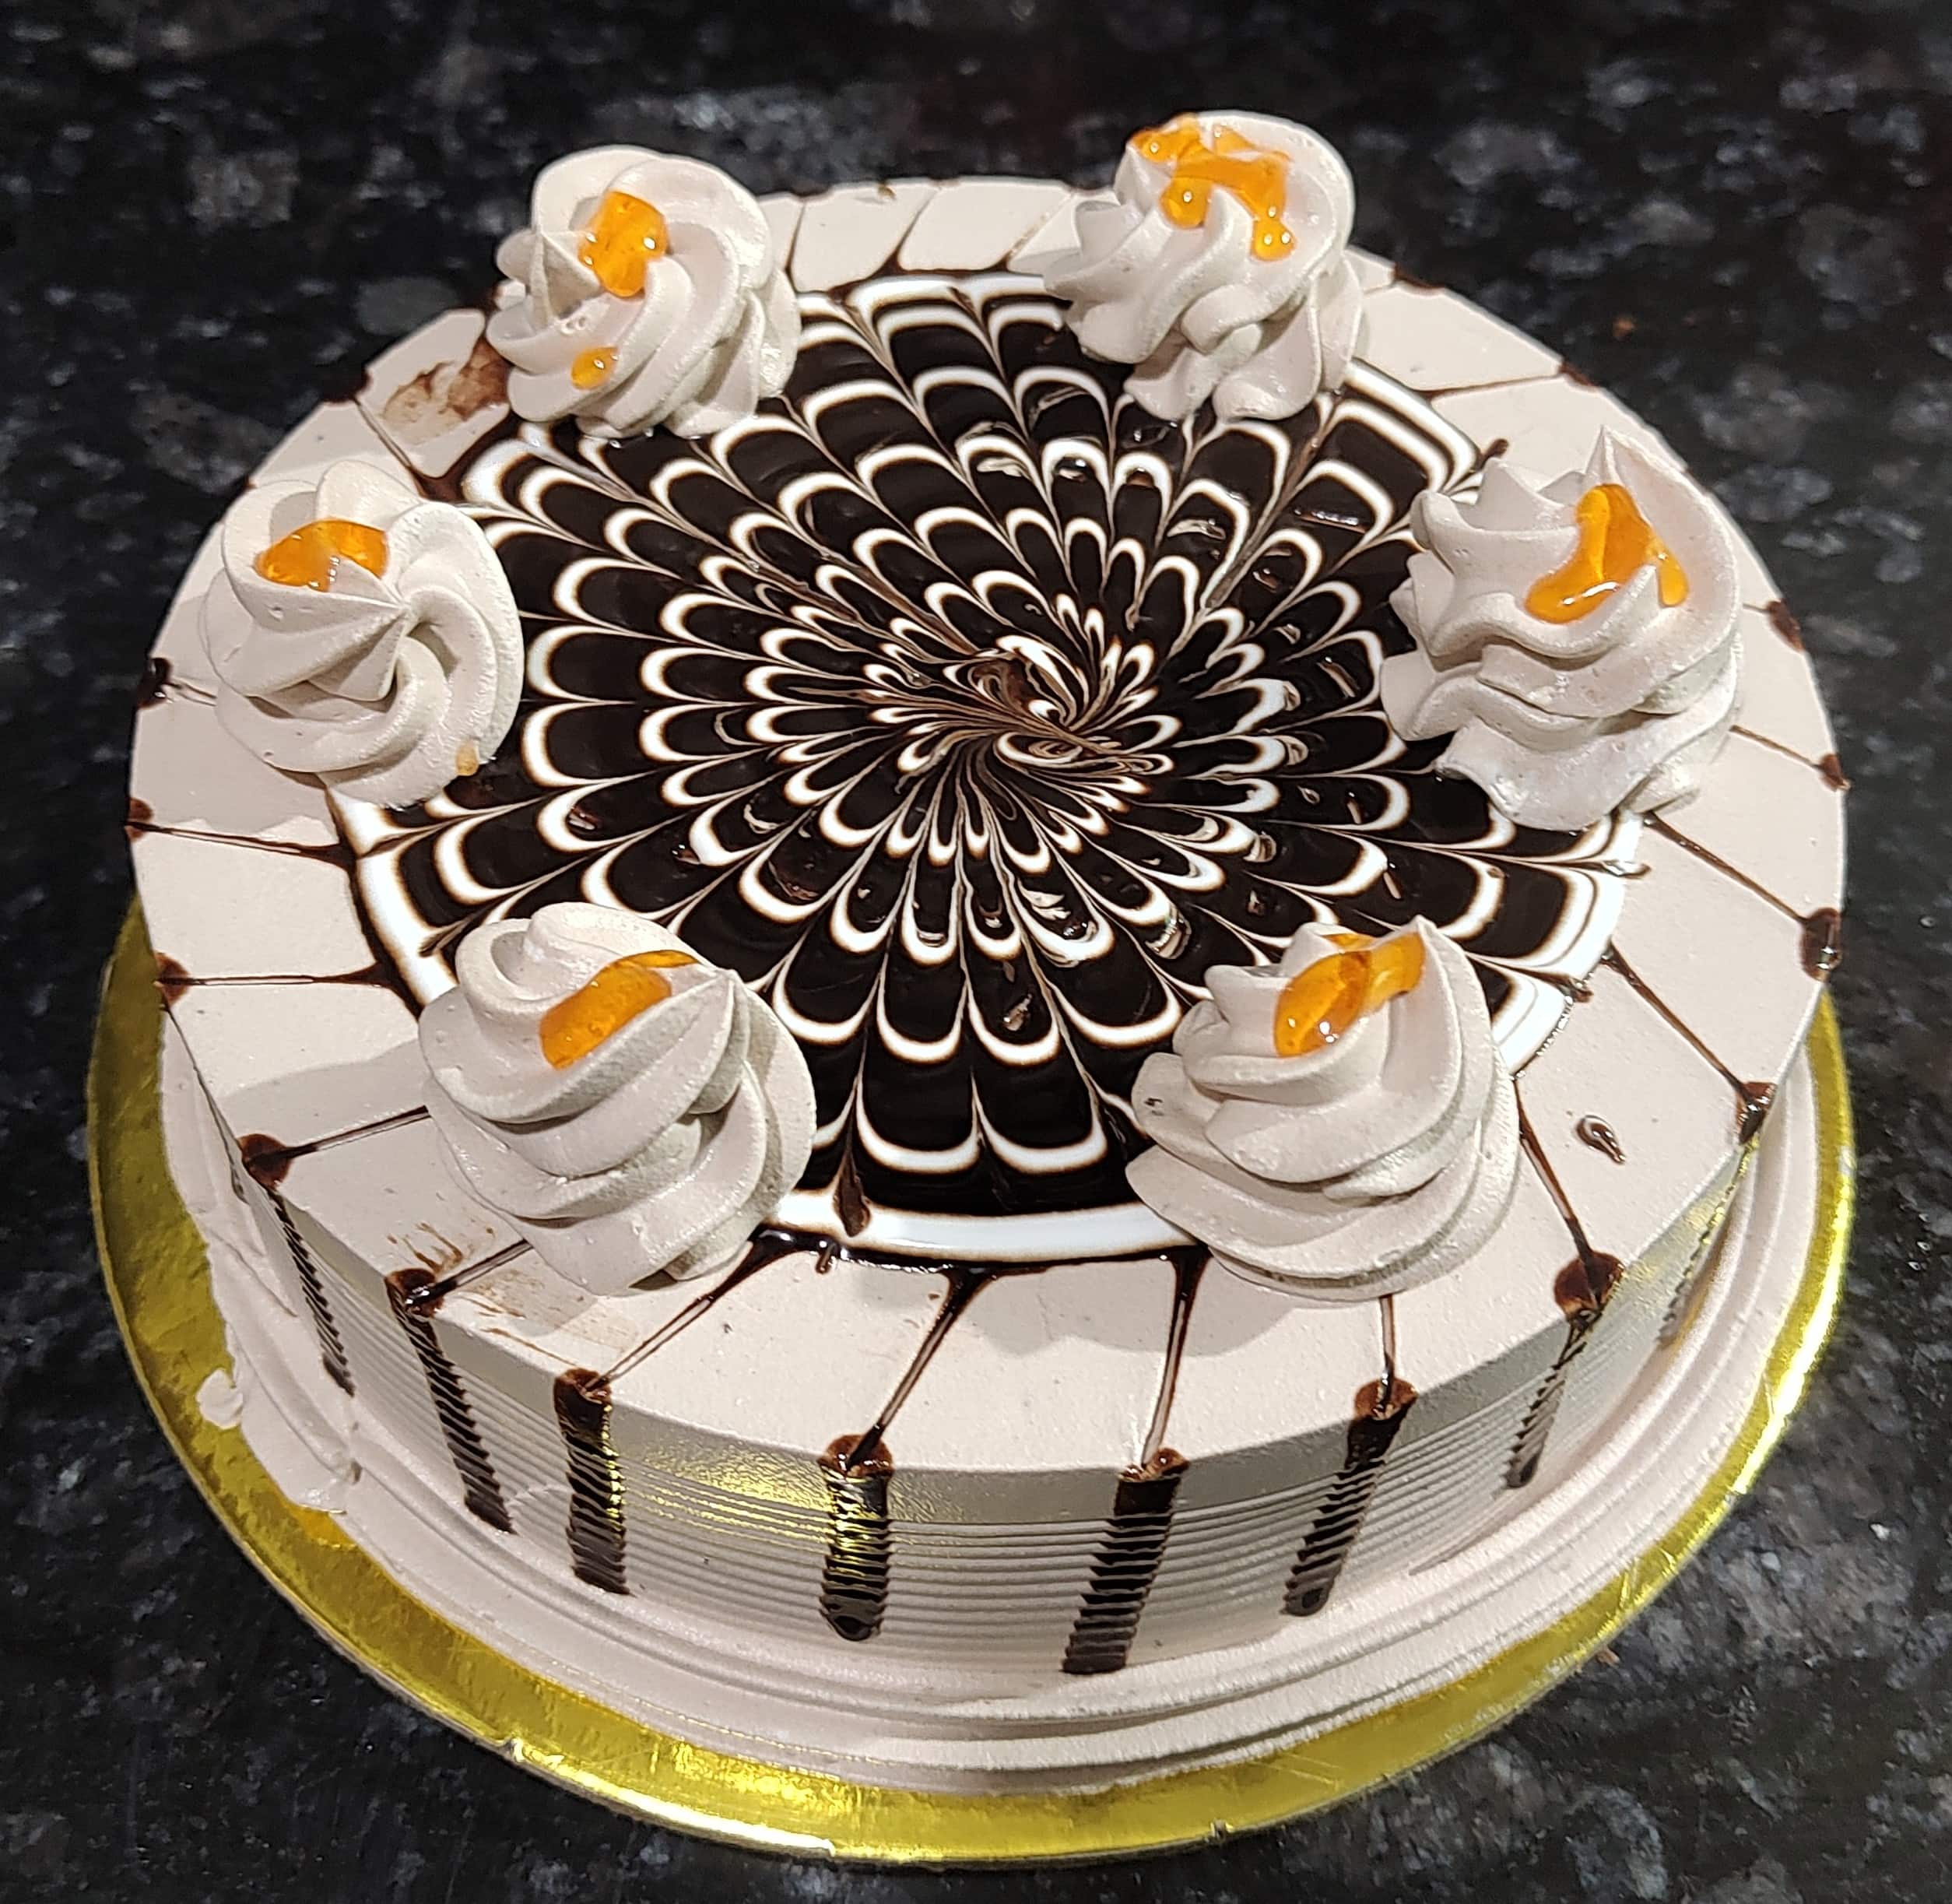 Online Cake and Flowers Delivery in Bangalore by Rose nCakes - Issuu